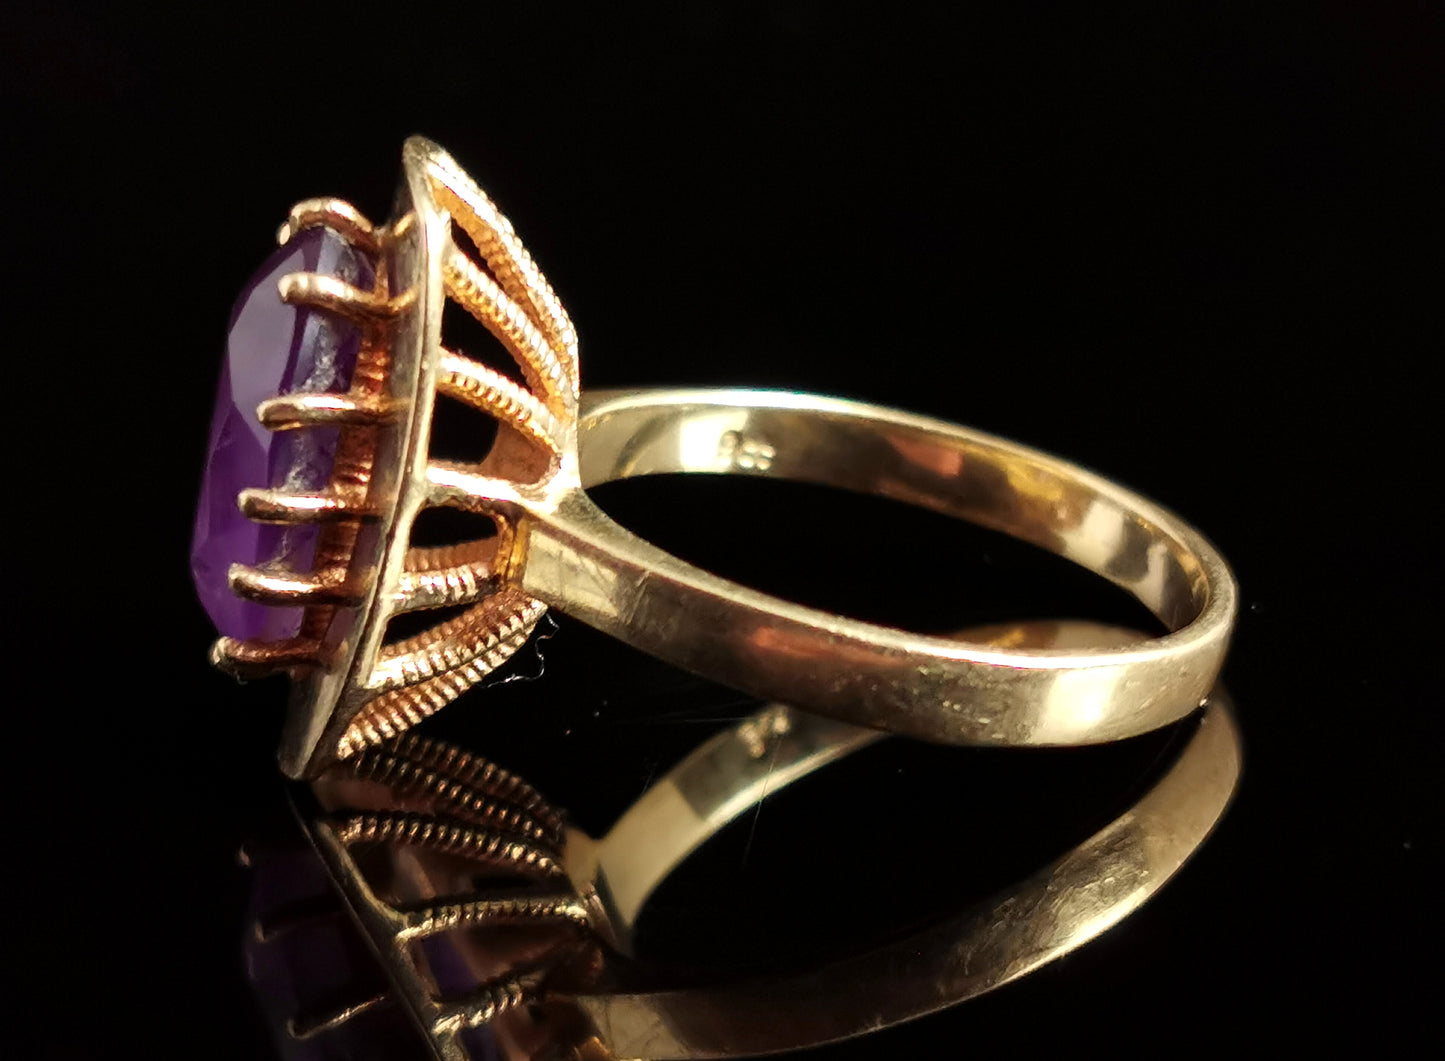 Vintage Amethyst cocktail ring, 9ct gold, 1970s